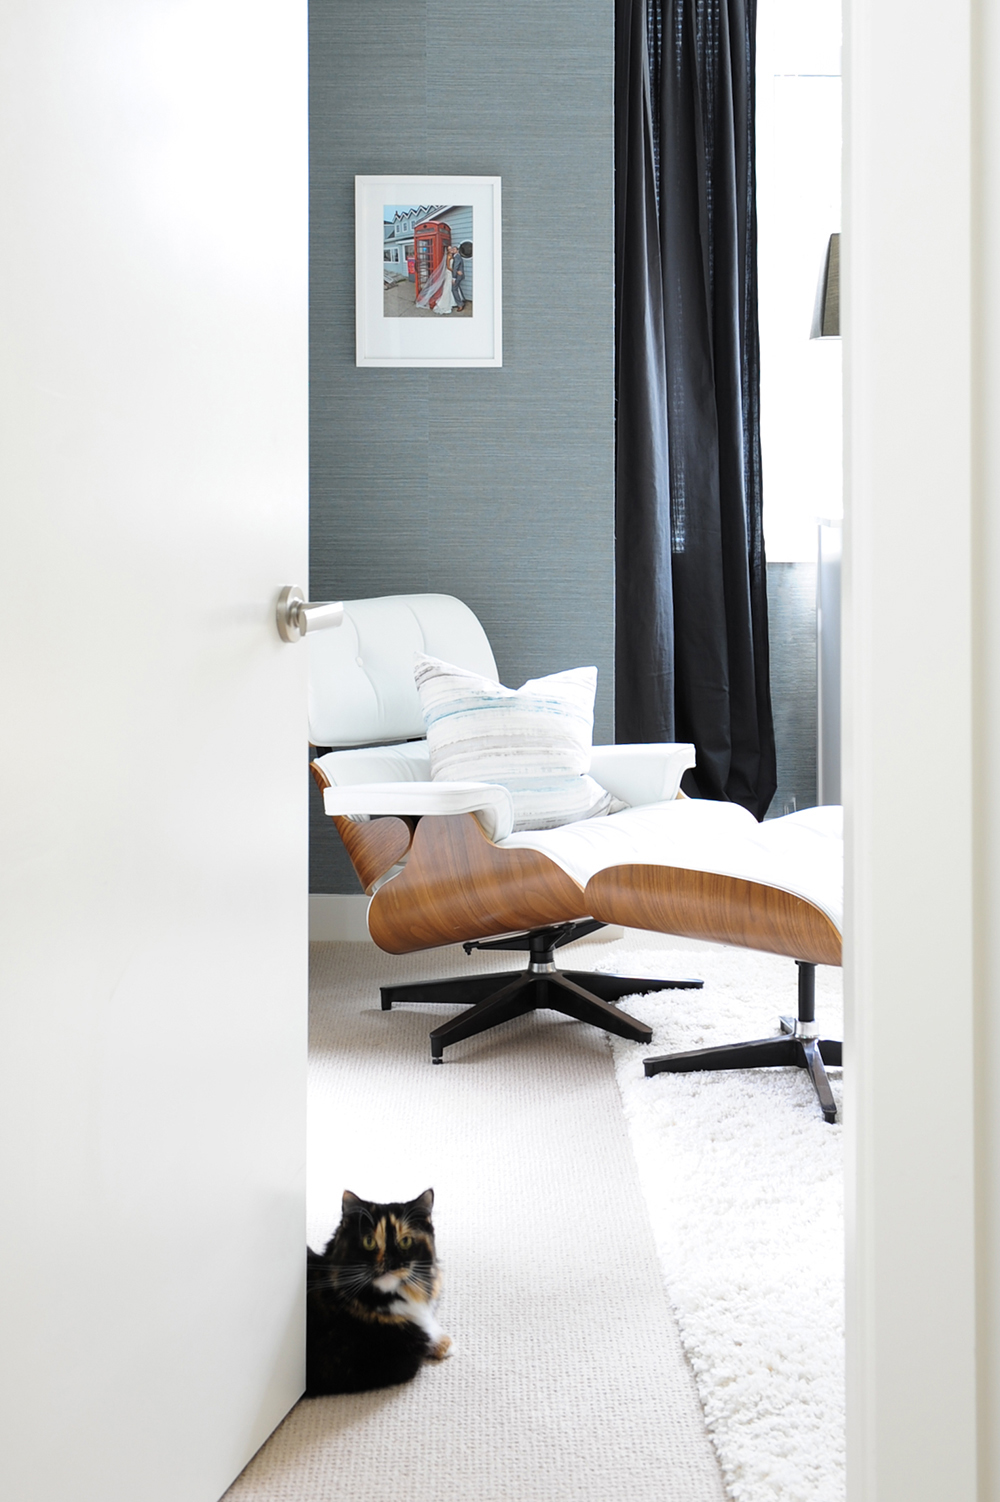 A master bedroom featuring a white leather Eames chair.